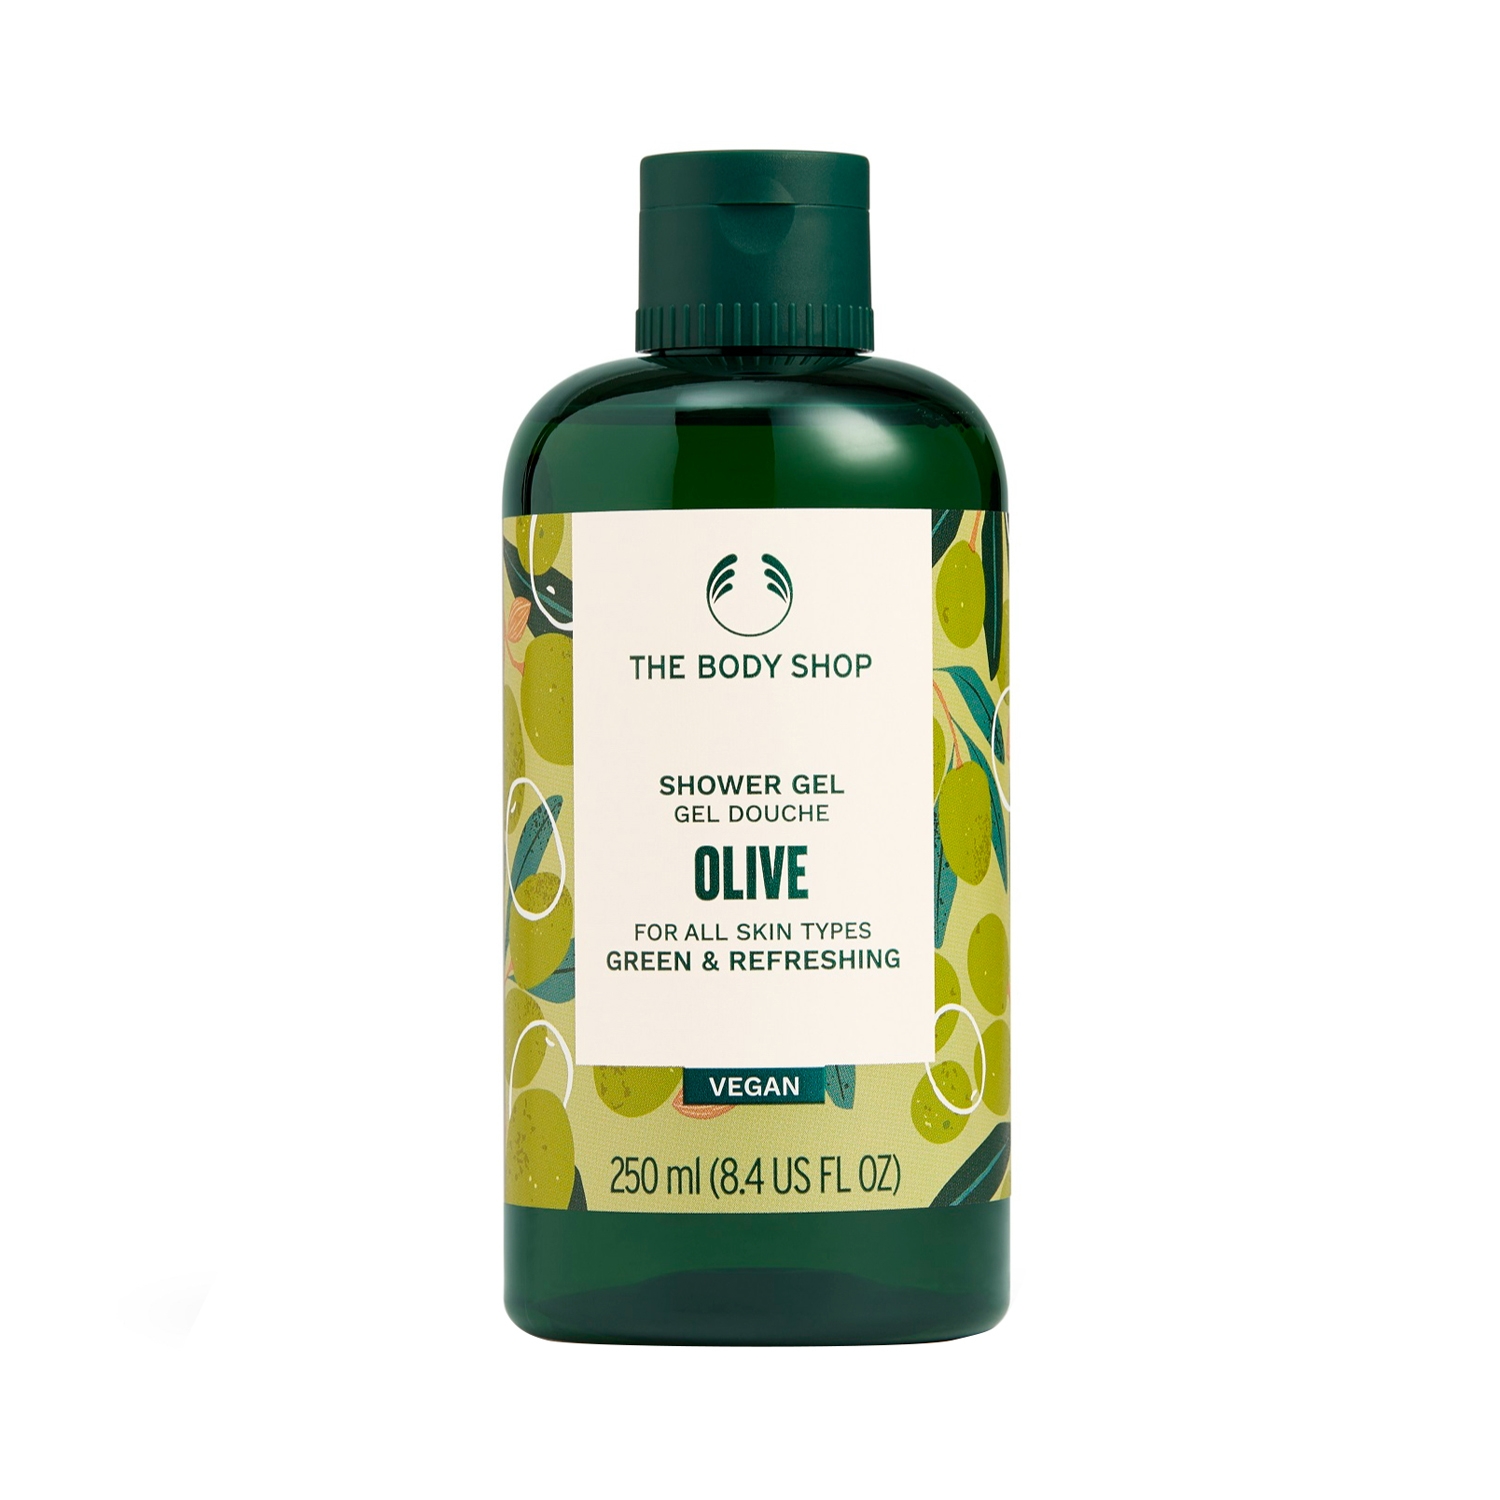 The Body Shop | The Body Shop Olive Shower Gel (250ml)